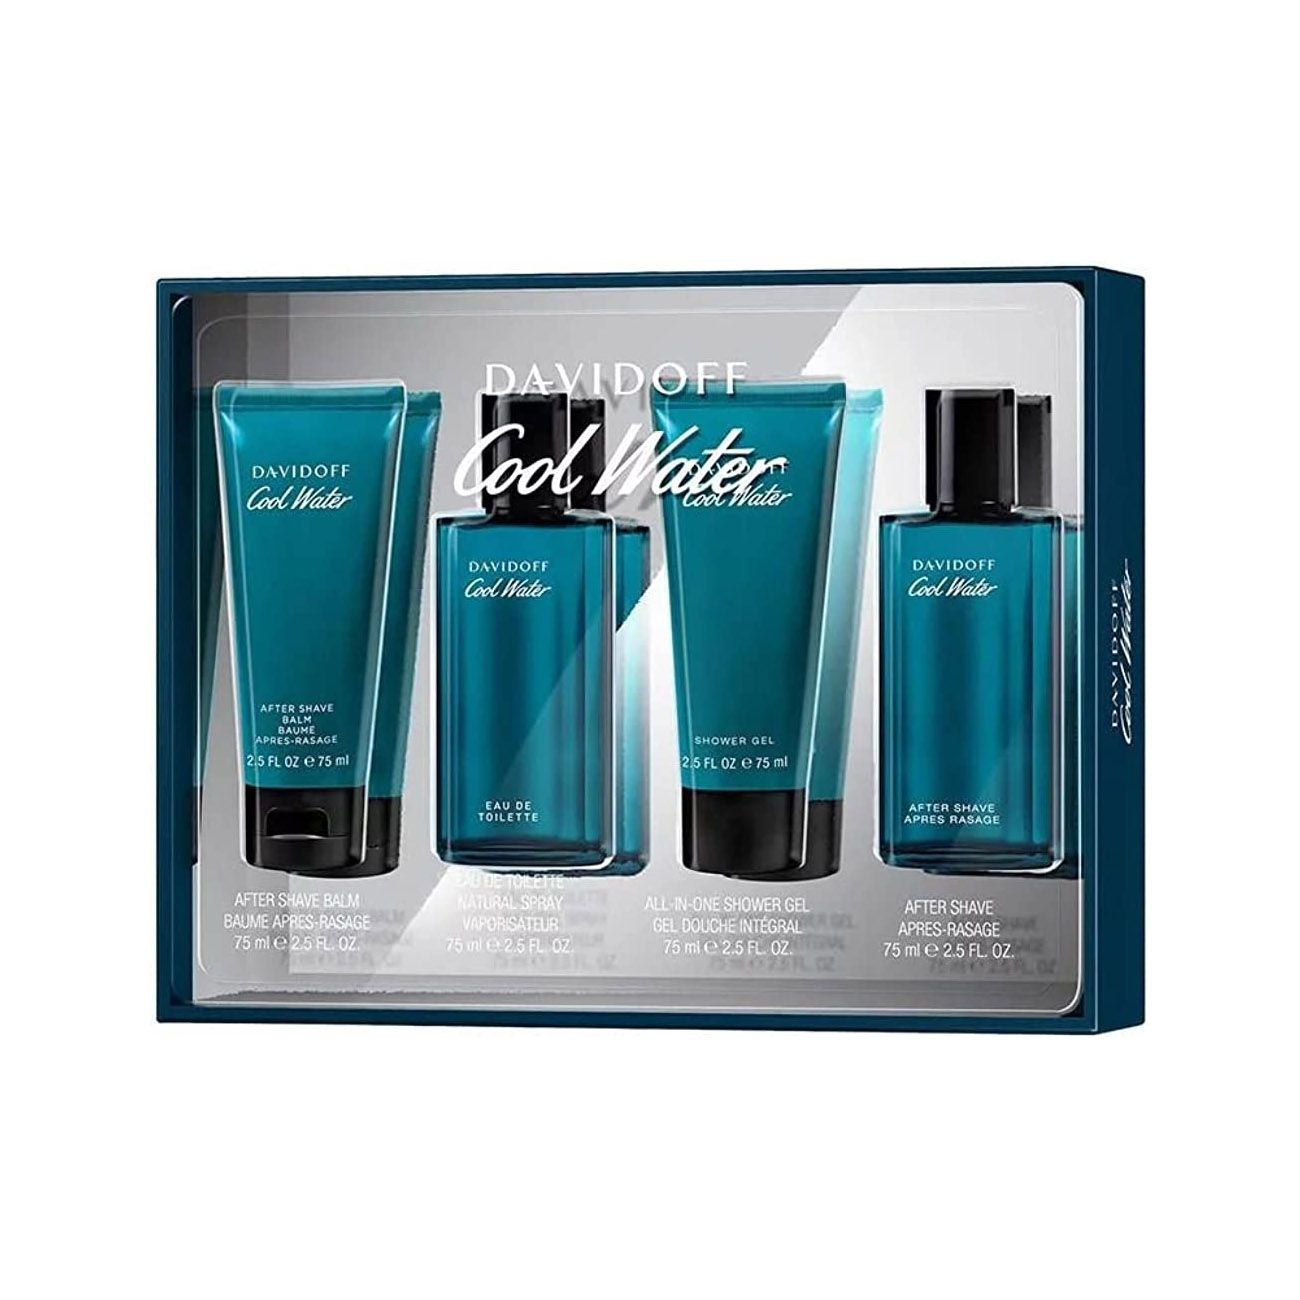 Davidoff Cool Water 4 Piece Gift Set for Men at Ratans Online Shop - Perfumes Wholesale and Retailer Fragrance